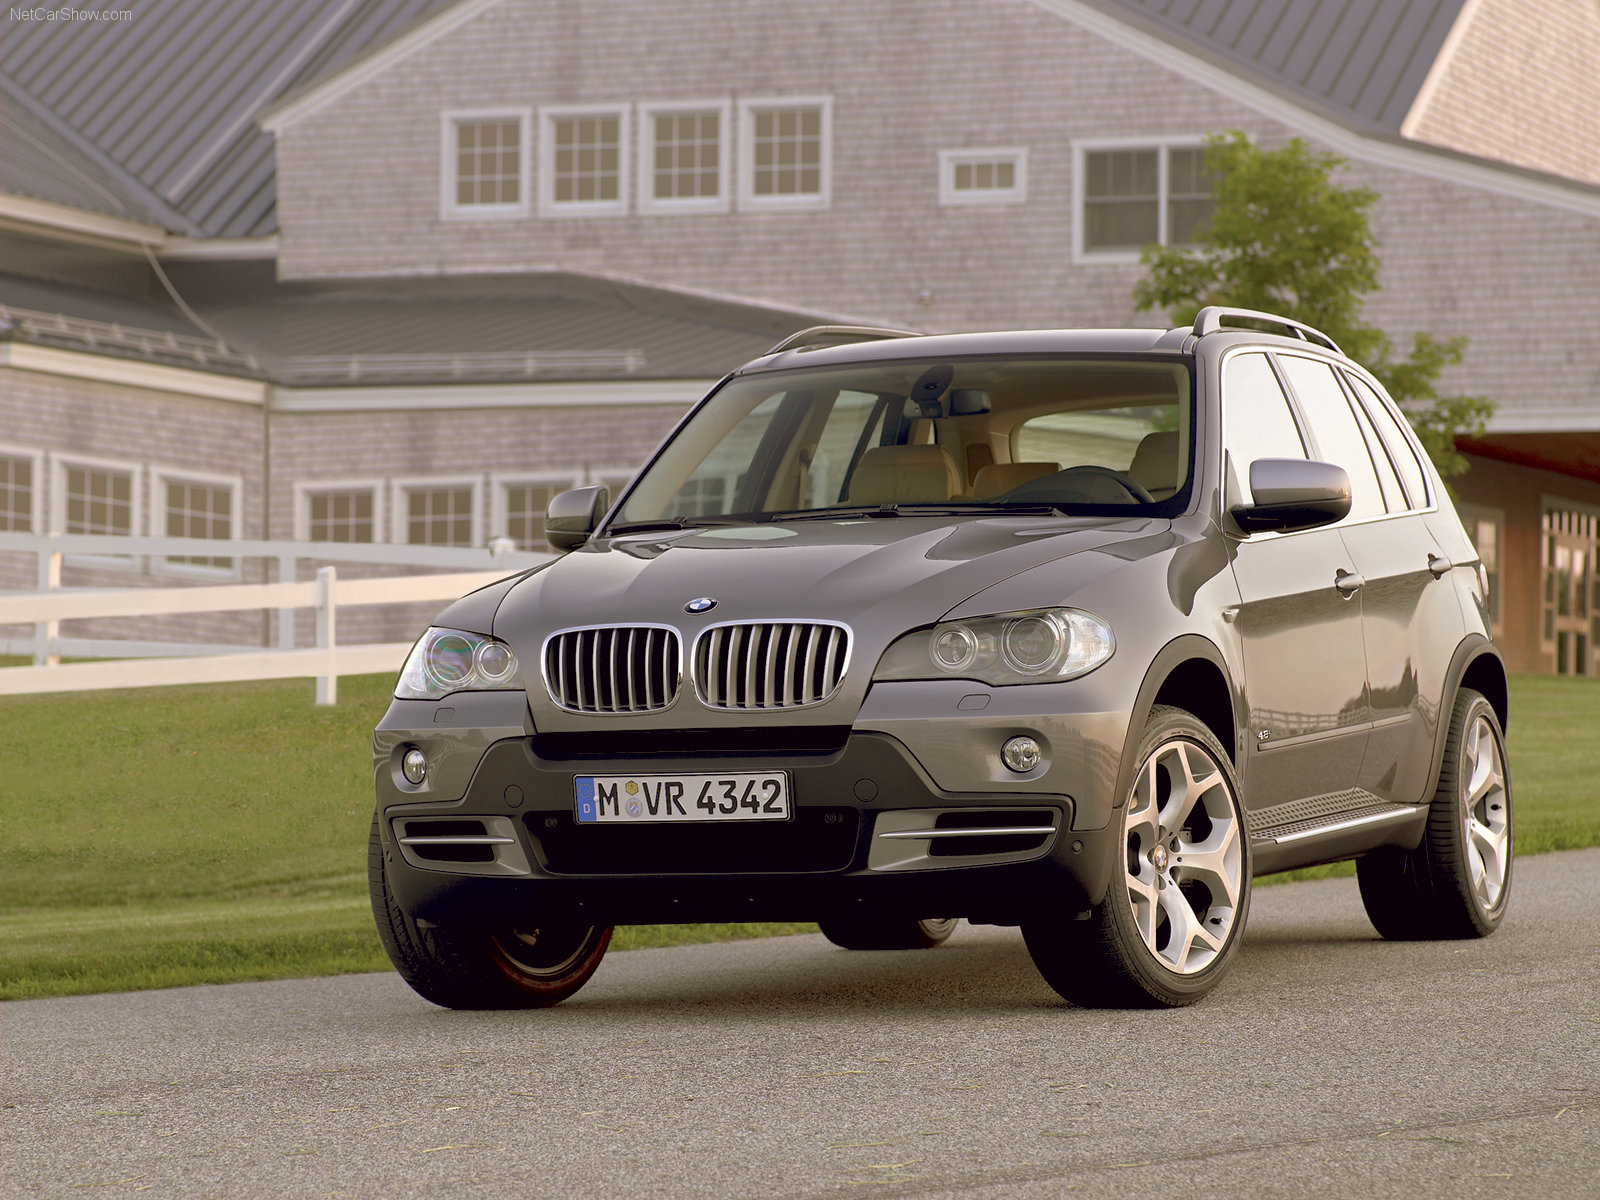 BMW X5 E70 picture 61920 BMW photo gallery